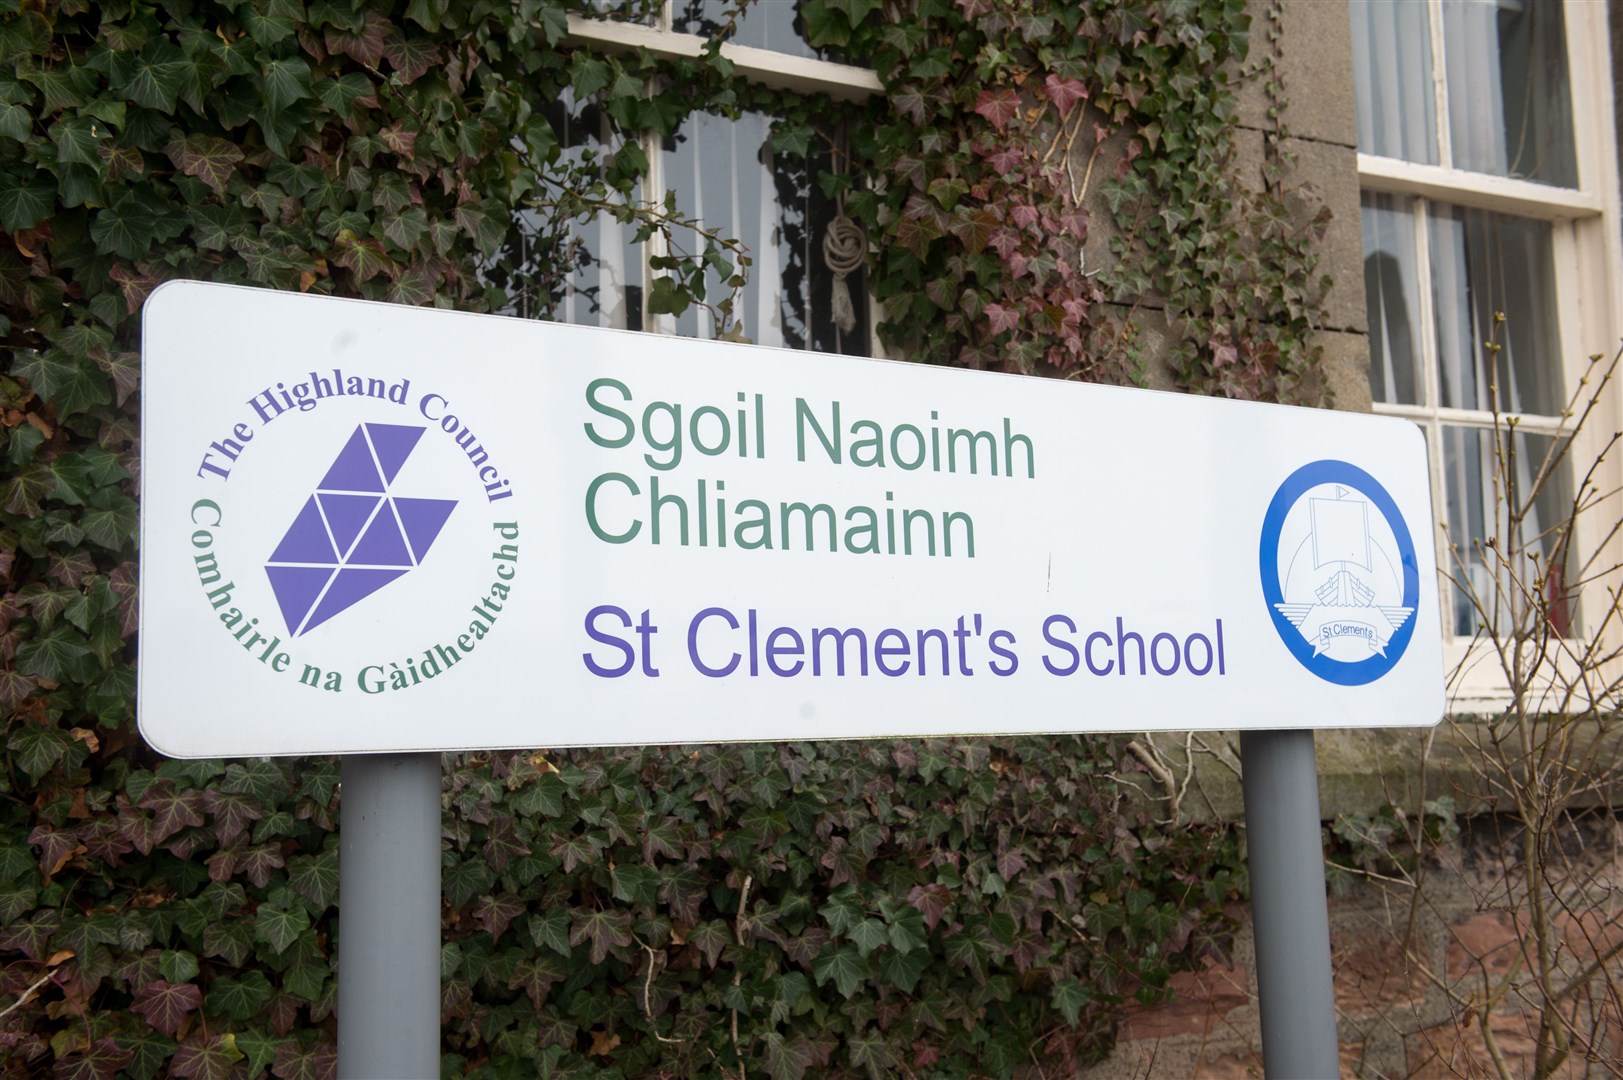 The school is now at the heart of a community campaign demanding already agreed plans for a new school are not ditched.